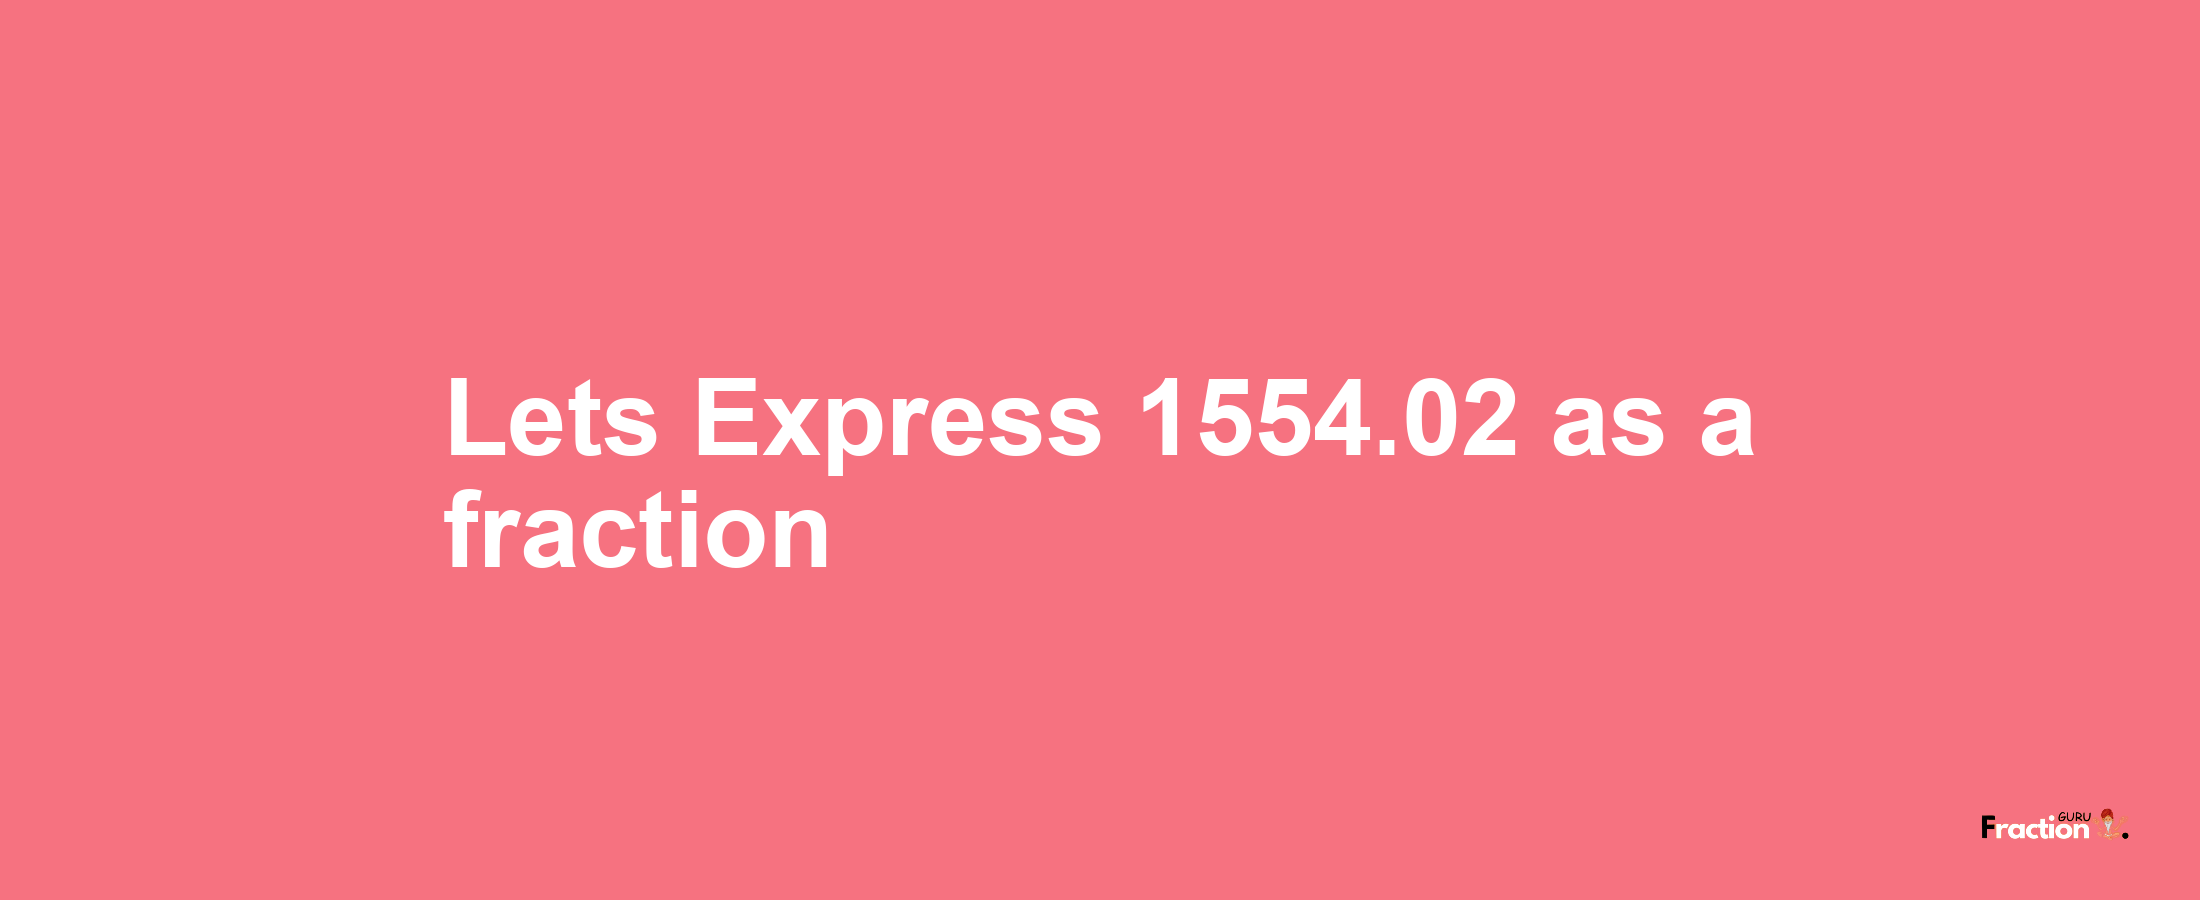 Lets Express 1554.02 as afraction